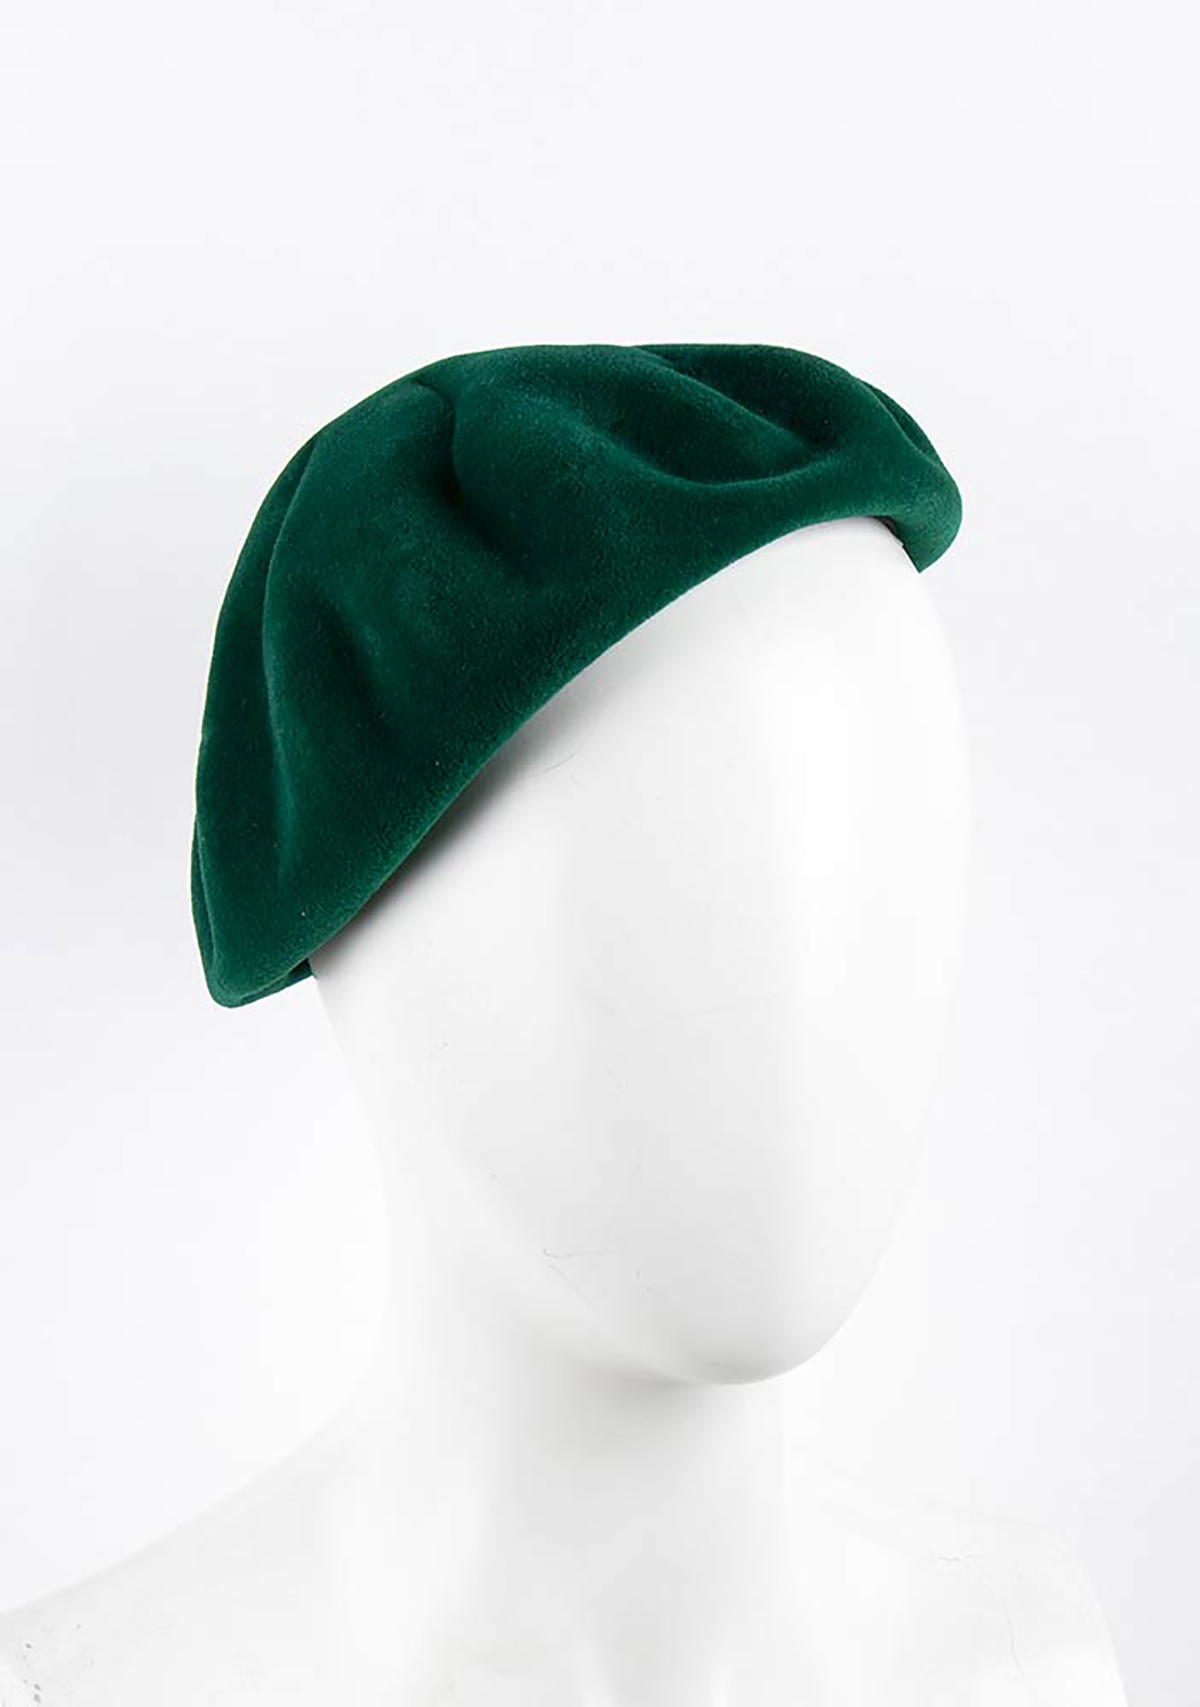 CHRISTIAN DIOR (LICENCE COPY) WOOL HAT 60s Green wool hat. General conditions grading B